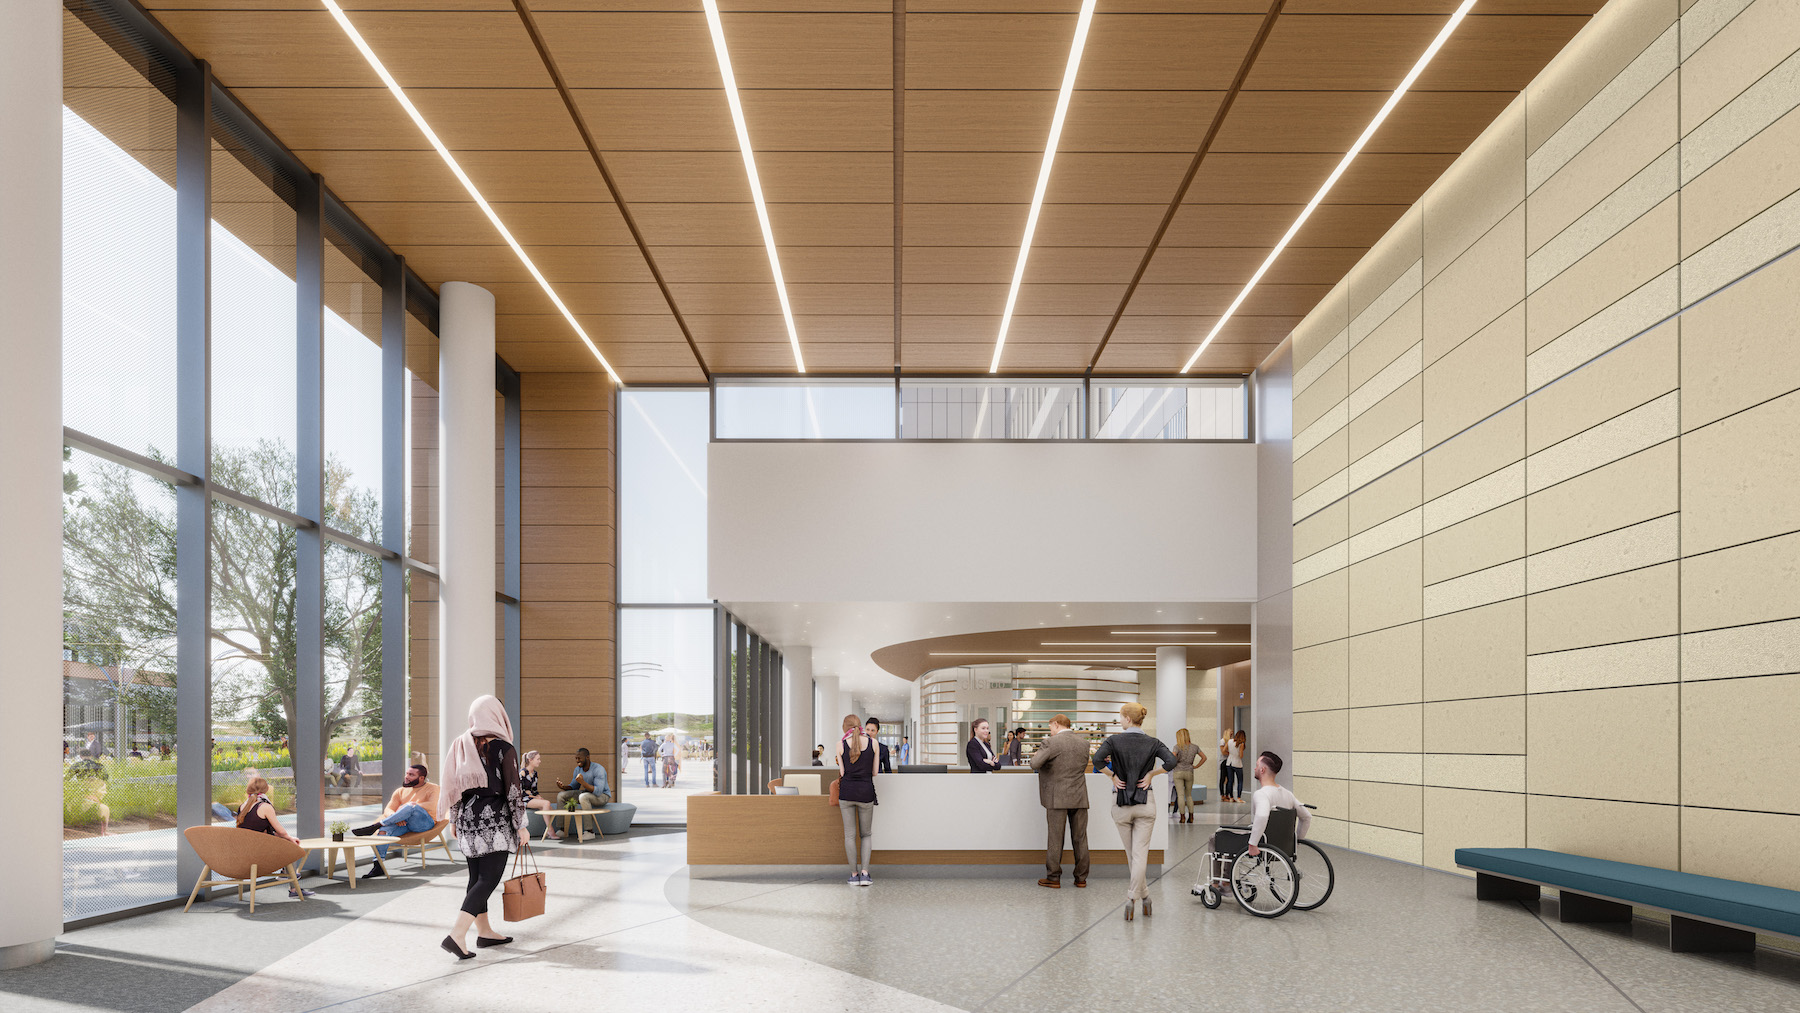 A spacious lobby greets visitors and patients at the UCI Medical Center.